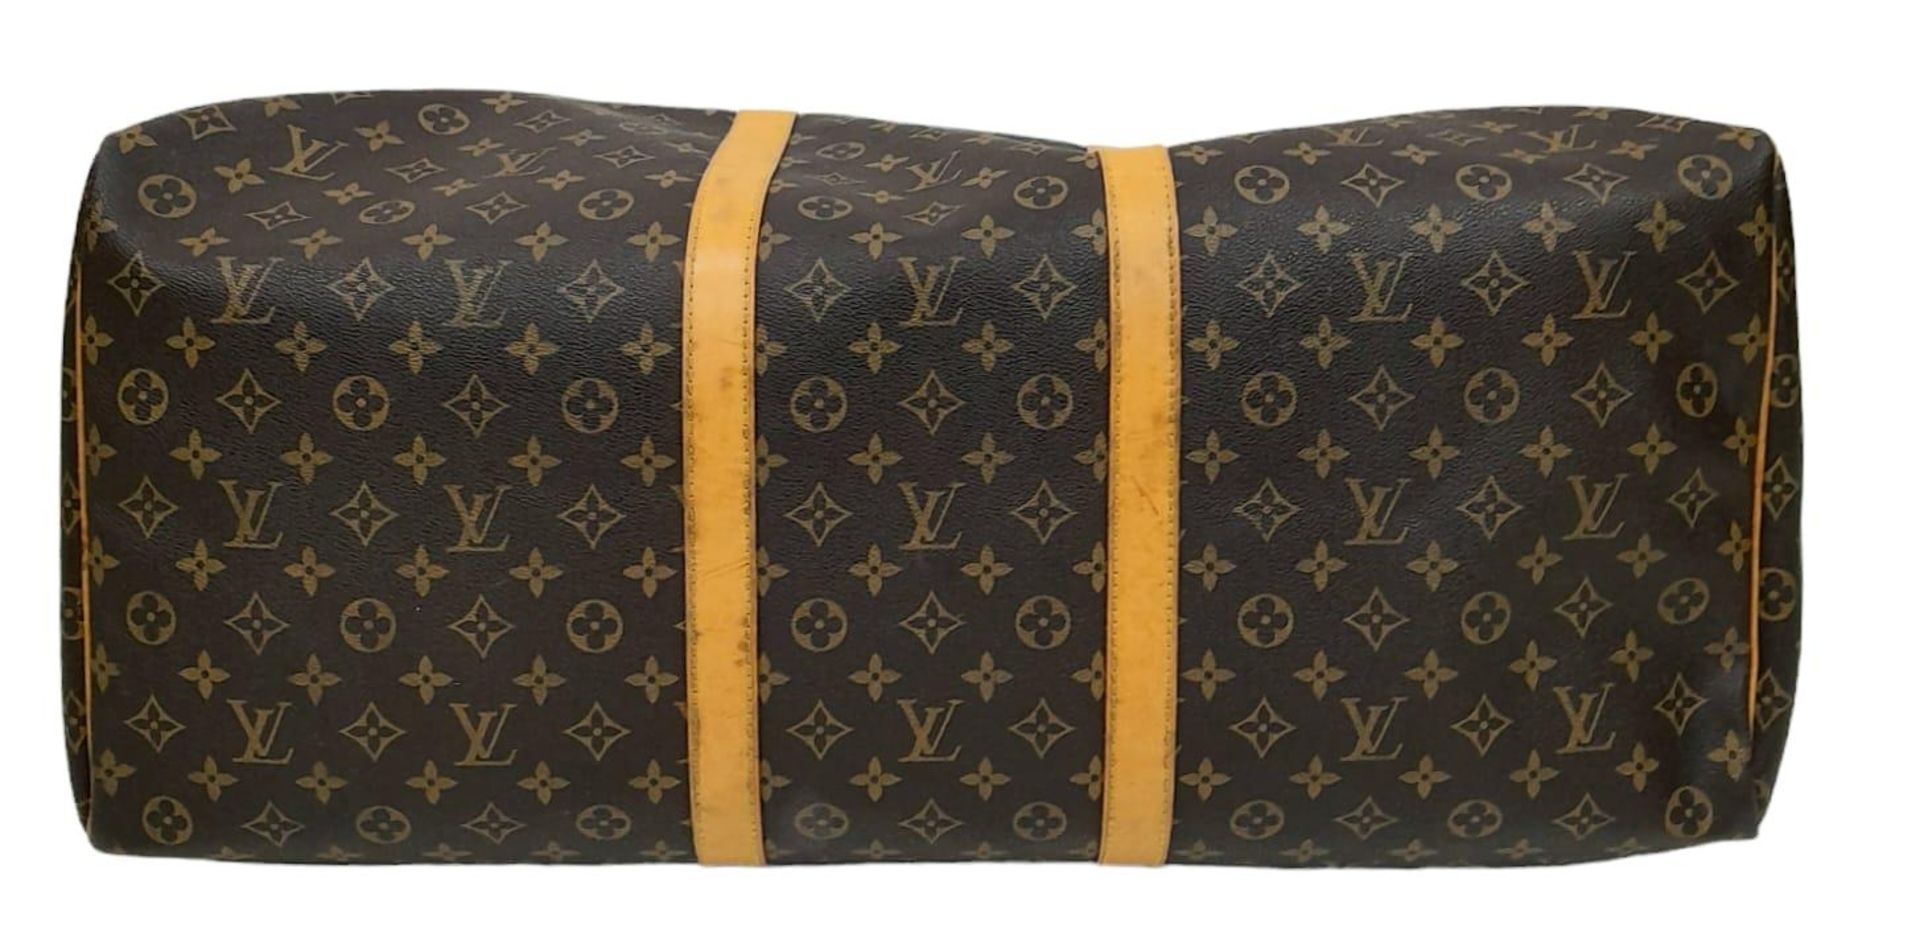 A Louis Vuitton Monogram Keepall 60 Travel Bag. Leather exterior with gold-toned hardware, two - Image 5 of 12